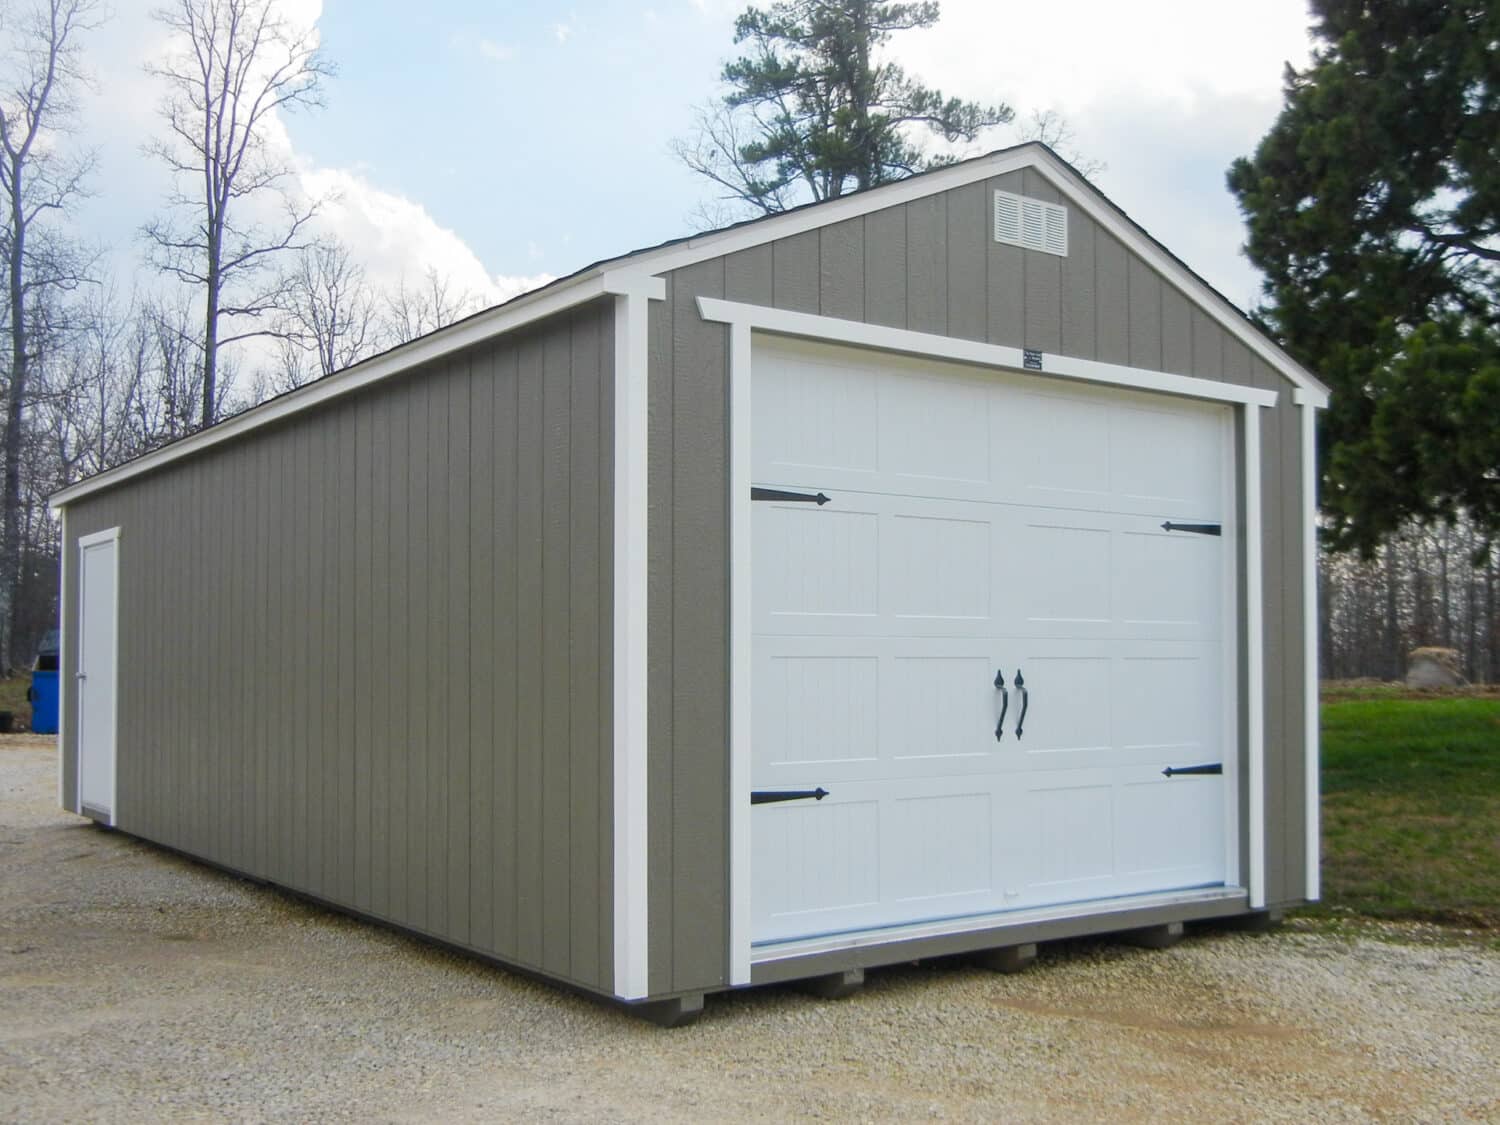 prebuilt portable garages with roll doors in windsor mo-1